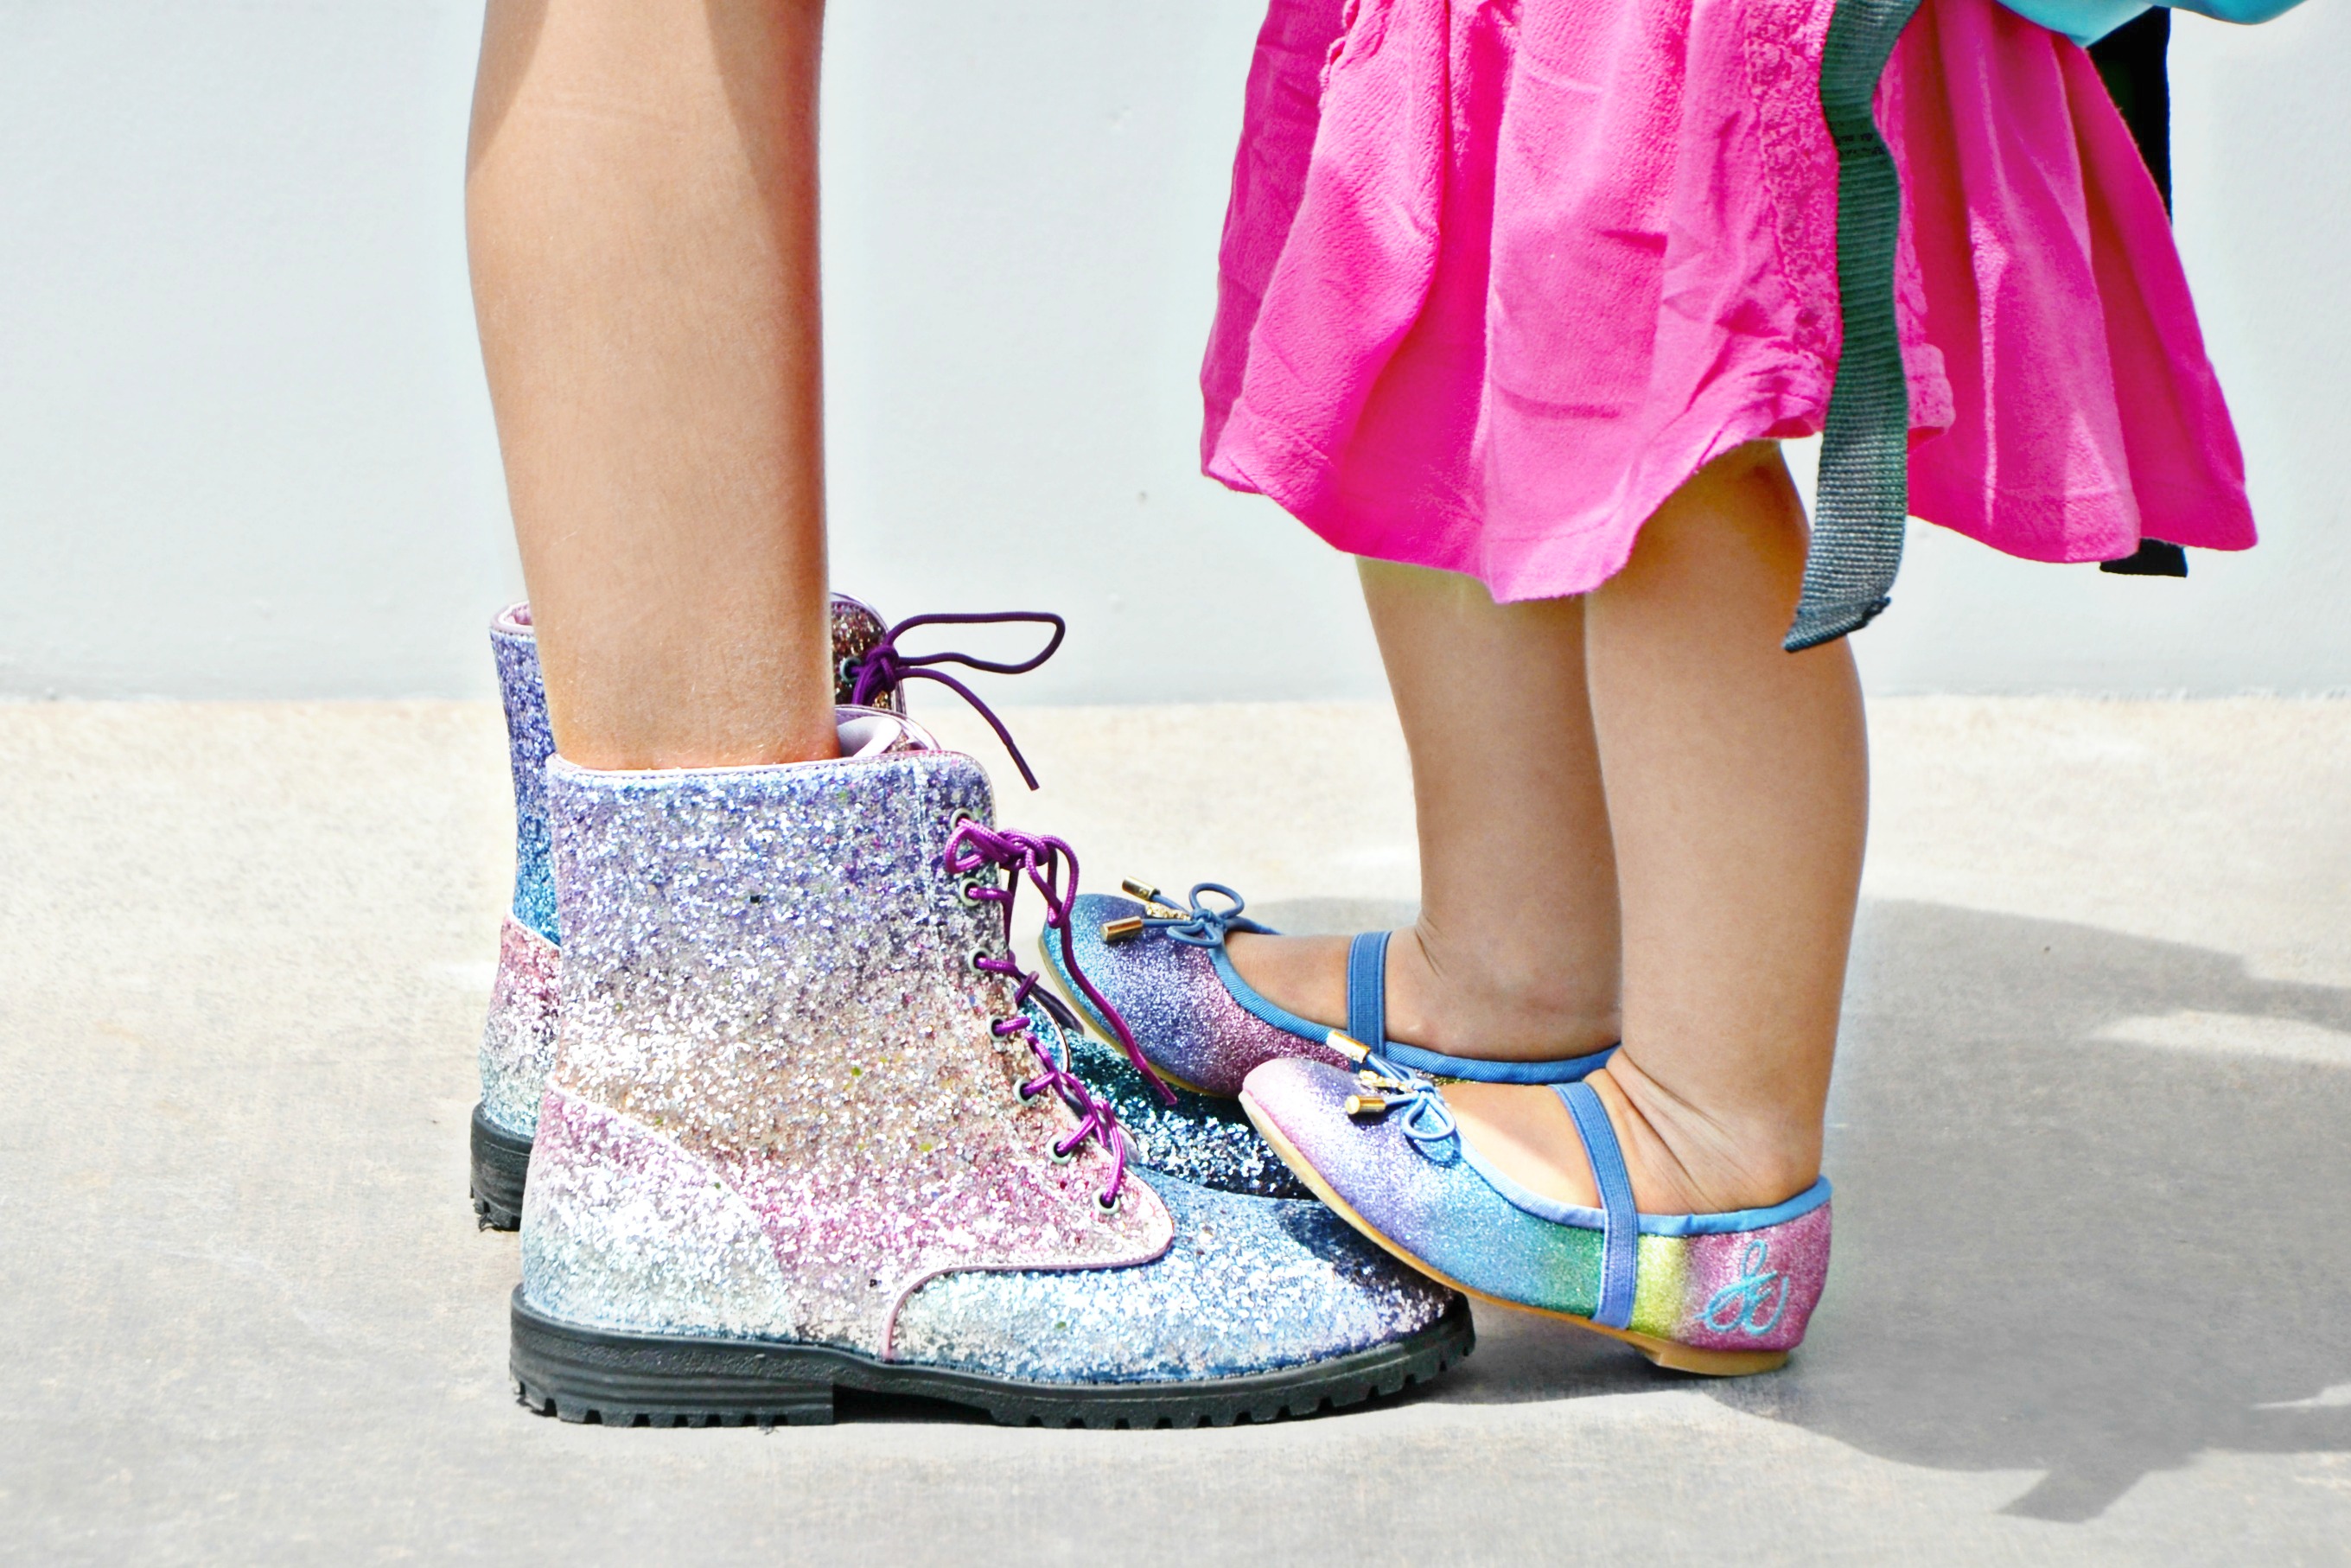 Siblings can match in rainbow glitter with Sam Edelman POLLY Sophia CHUNKY combat boots and Felicia Toddler rainbow glitter flats.